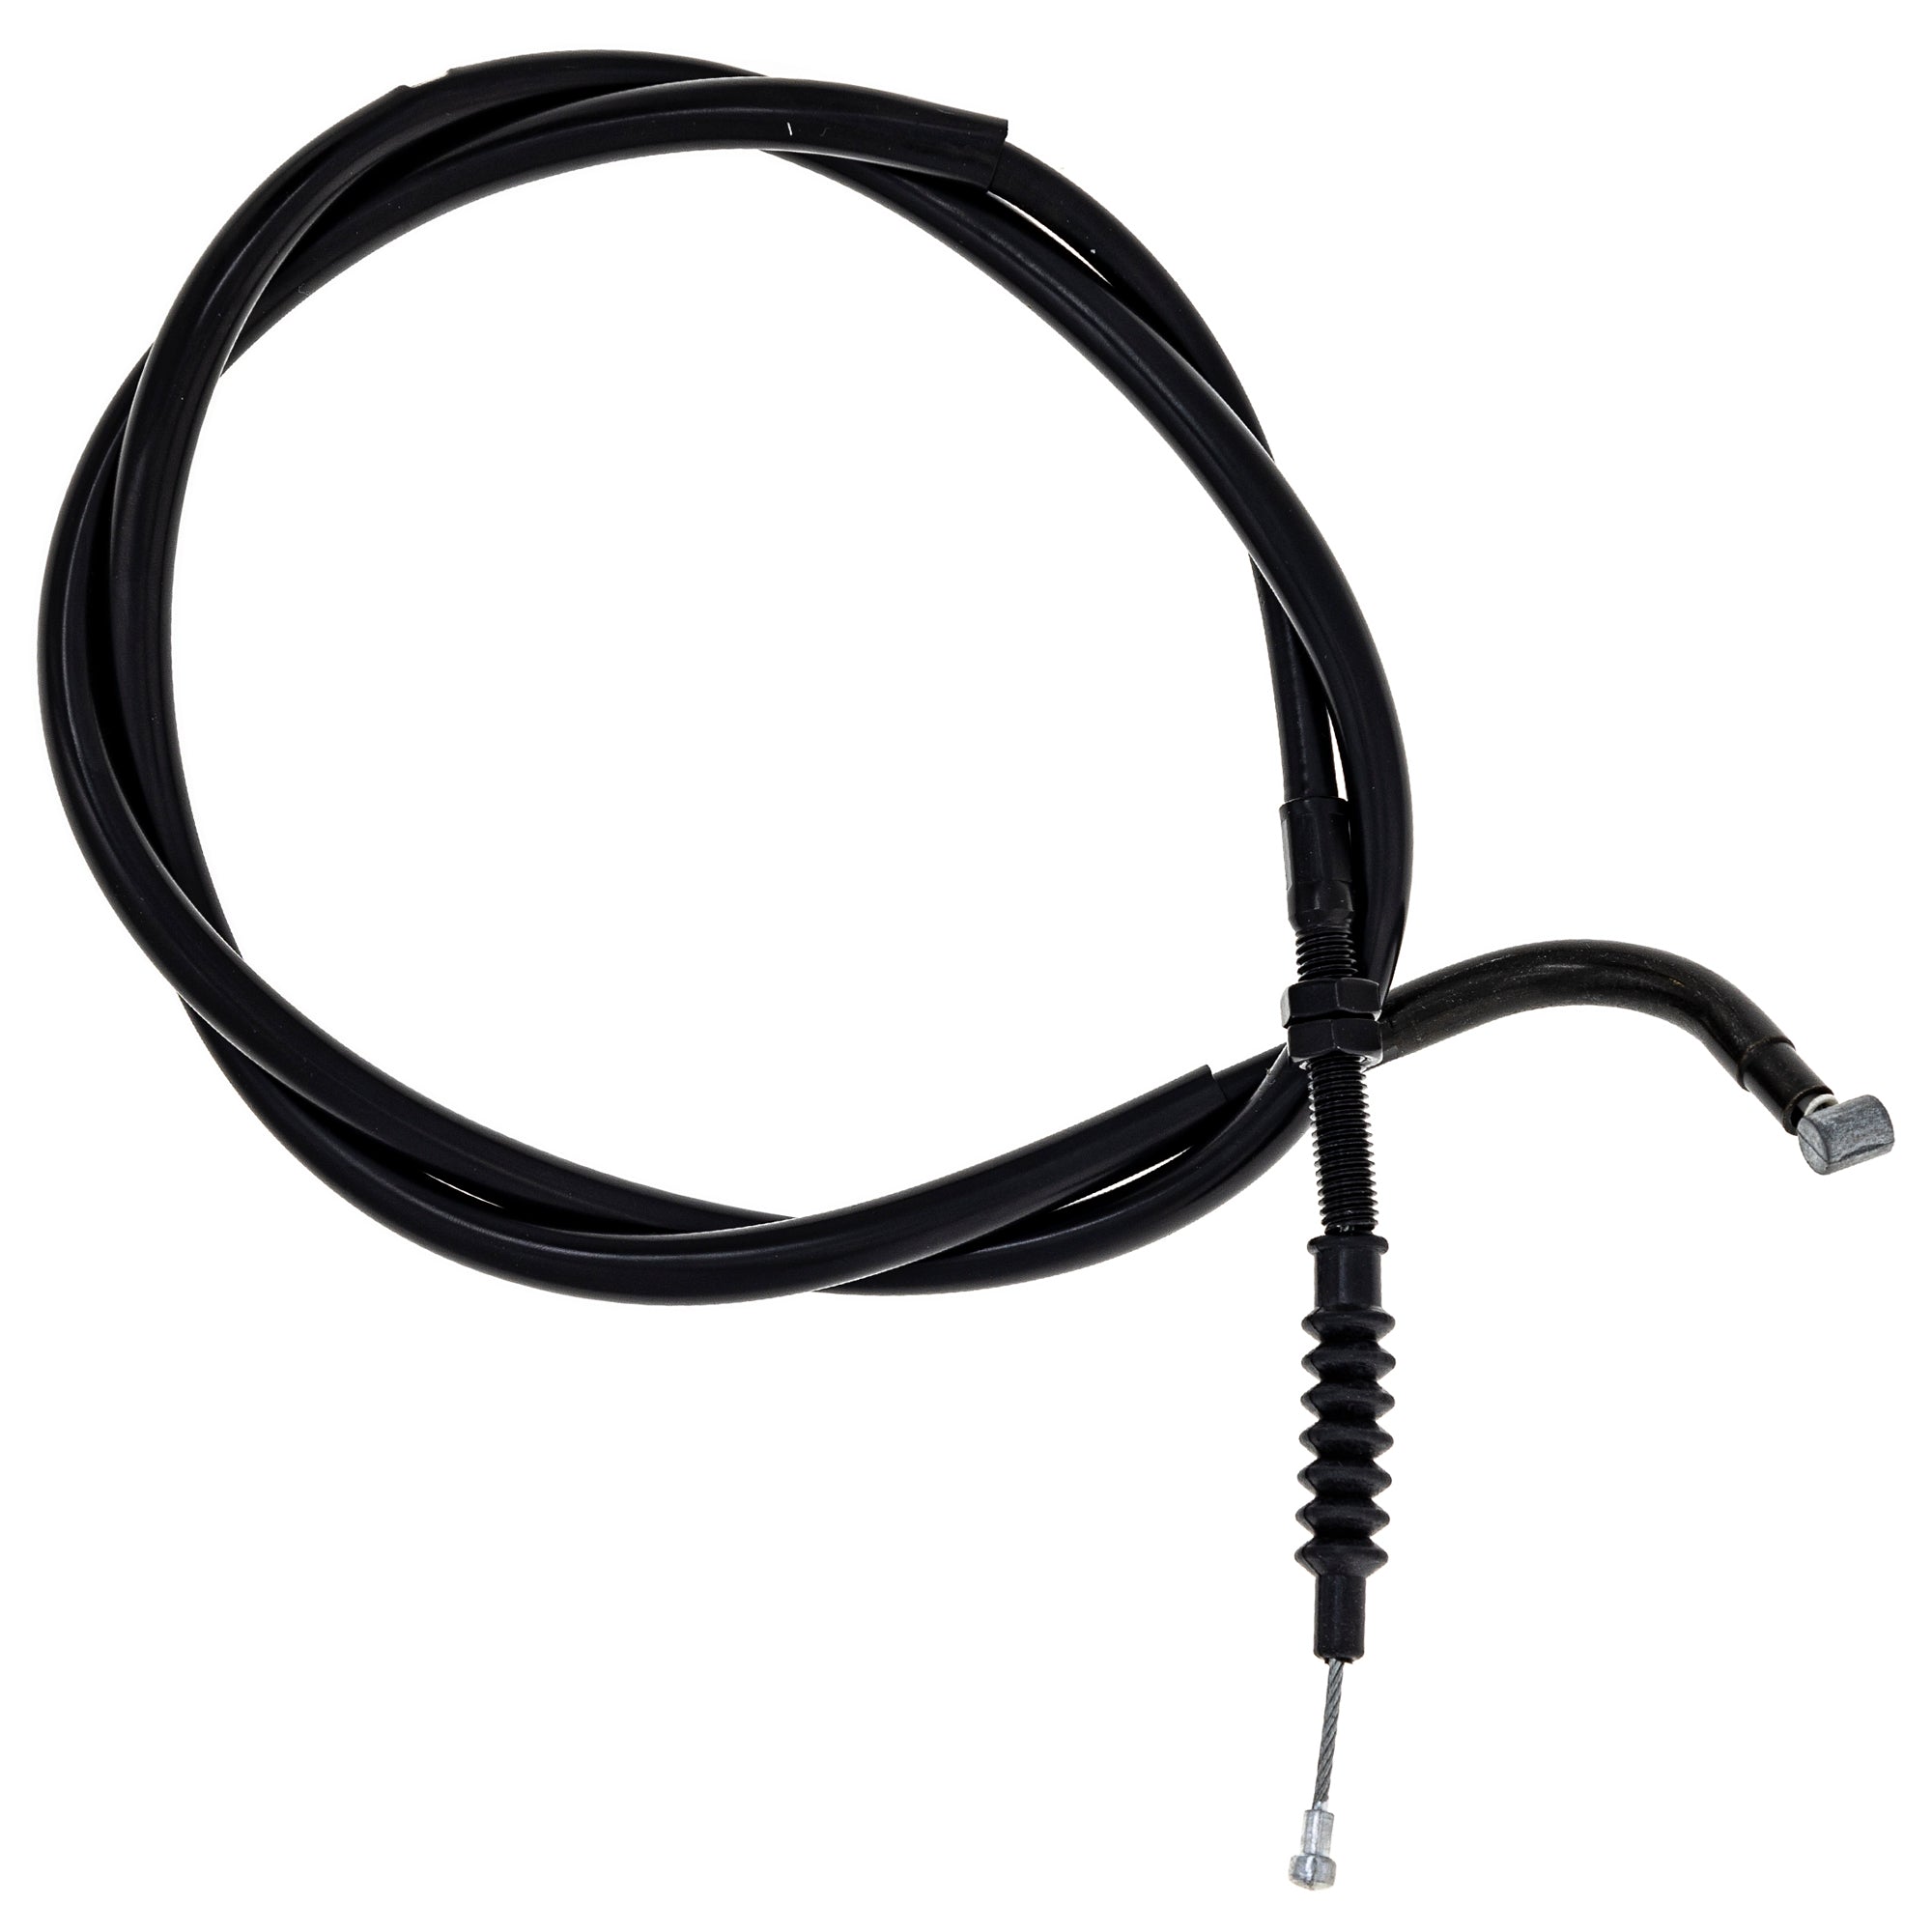 Clutch Cable for zOTHER Ninja NICHE 519-CCB2373L